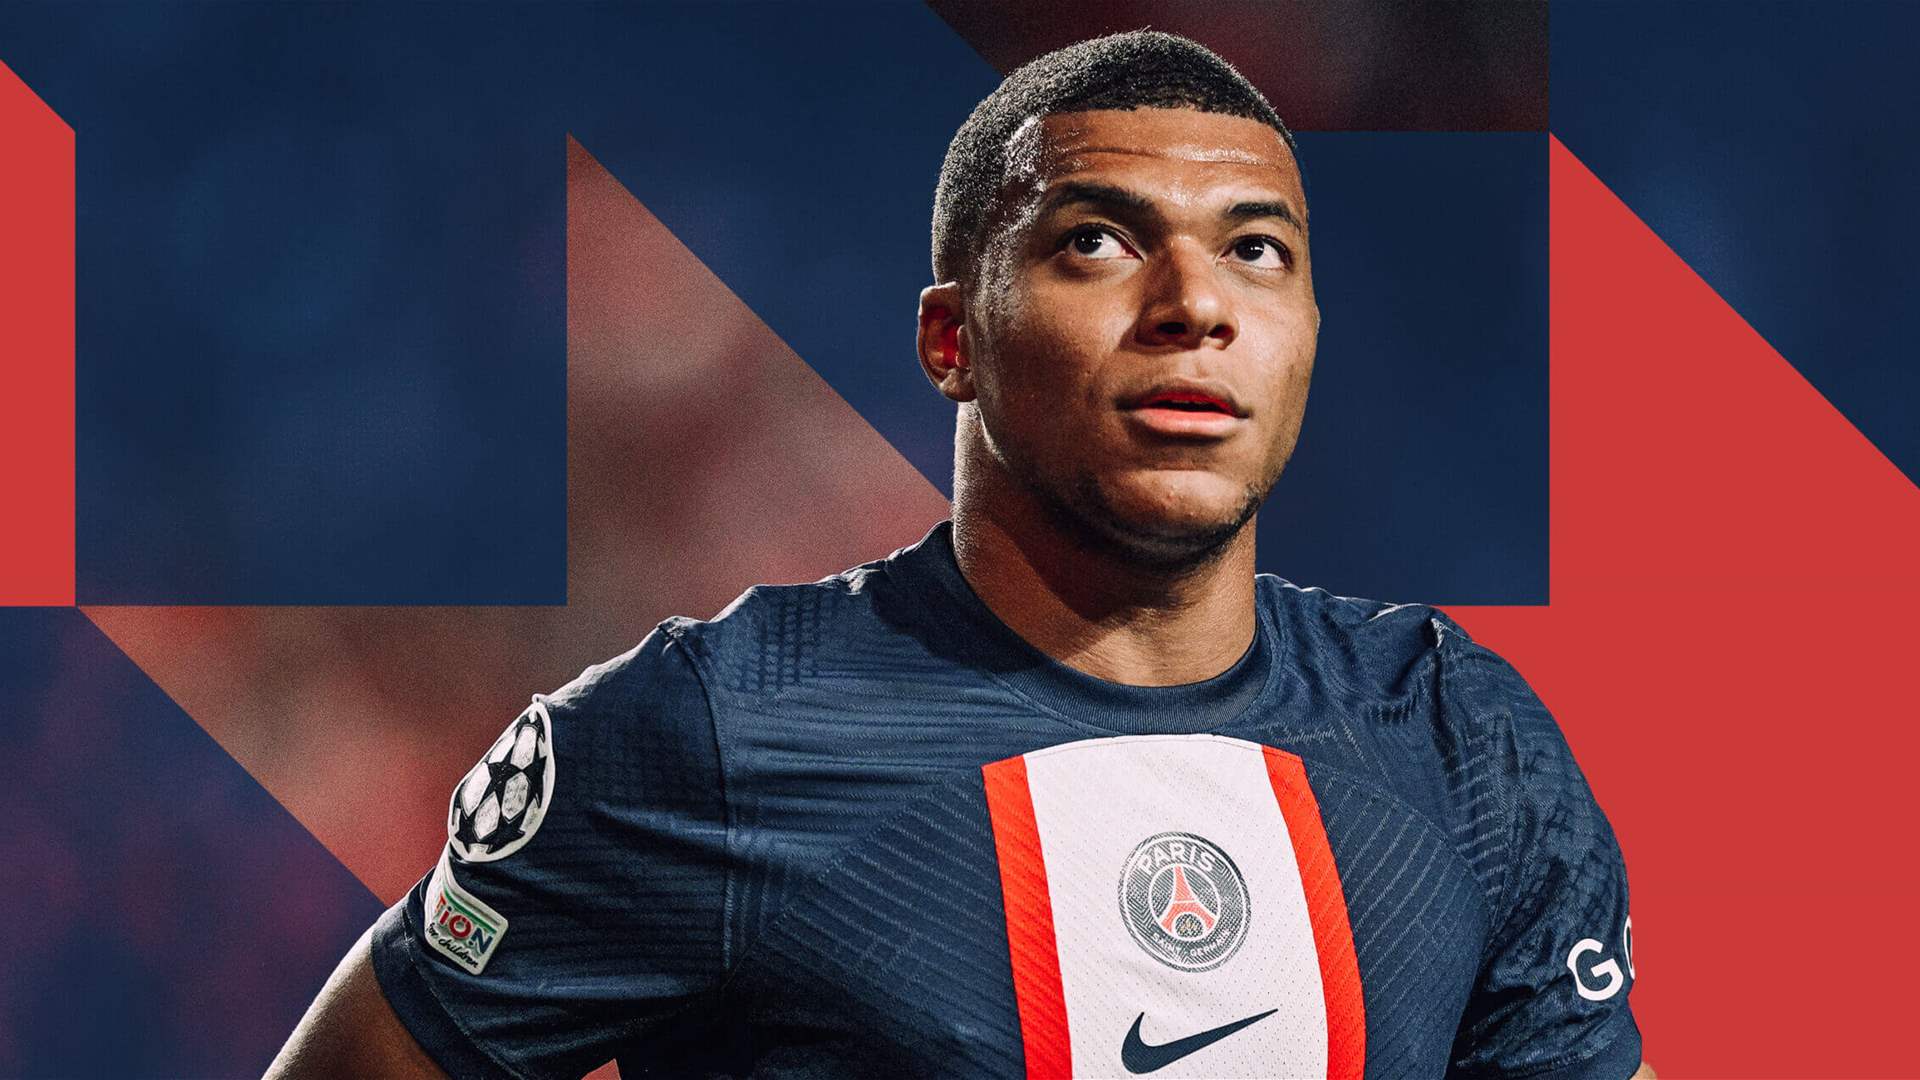 Mbappe and PSG crisis overshadows the start of the new Ligue 1 season